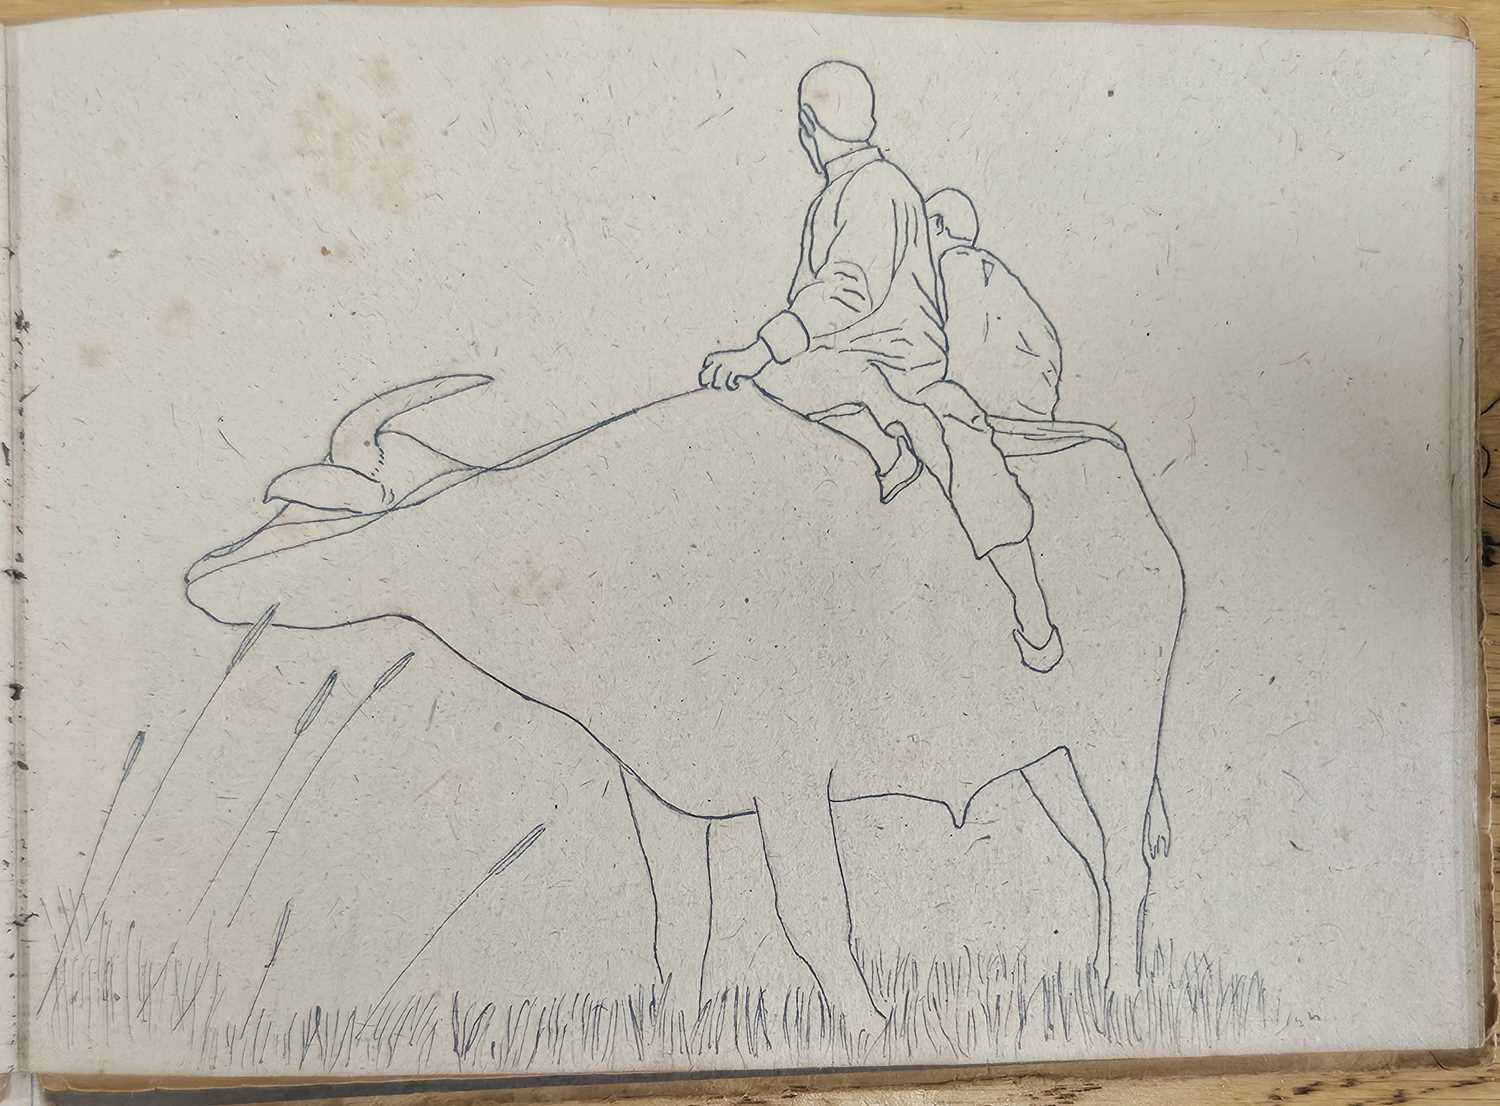 Rare Second World War sketchbook by POW 2nd/Lt Arkless Lockey - Image 16 of 35